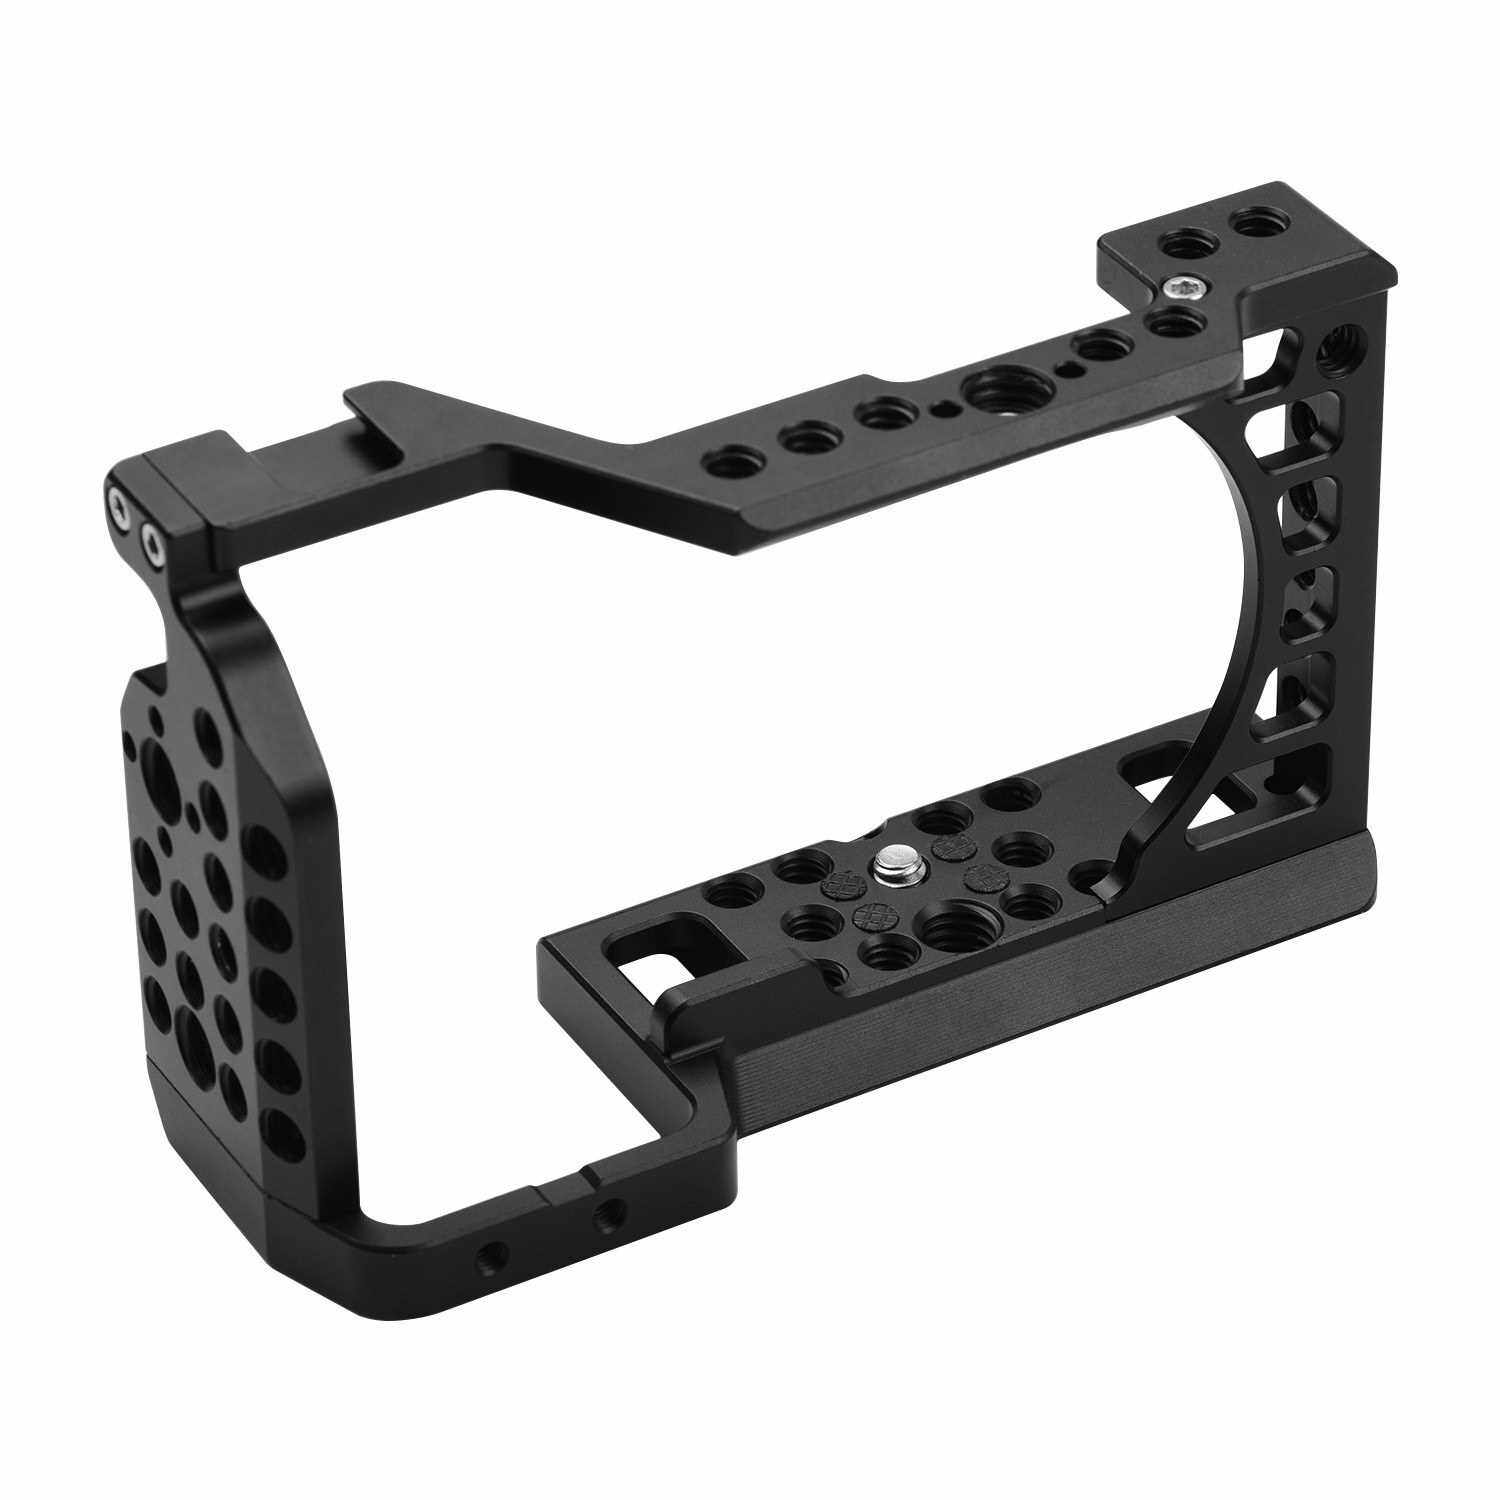 Aluminum Alloy Camera Cage Rig with Cold Shoe Mount ARRI Locating Hole 1/4 3/8 Threaded Holes Replacement for Sony A6000/A6100/A6300/A6400/A6500 Cameras (Standard)